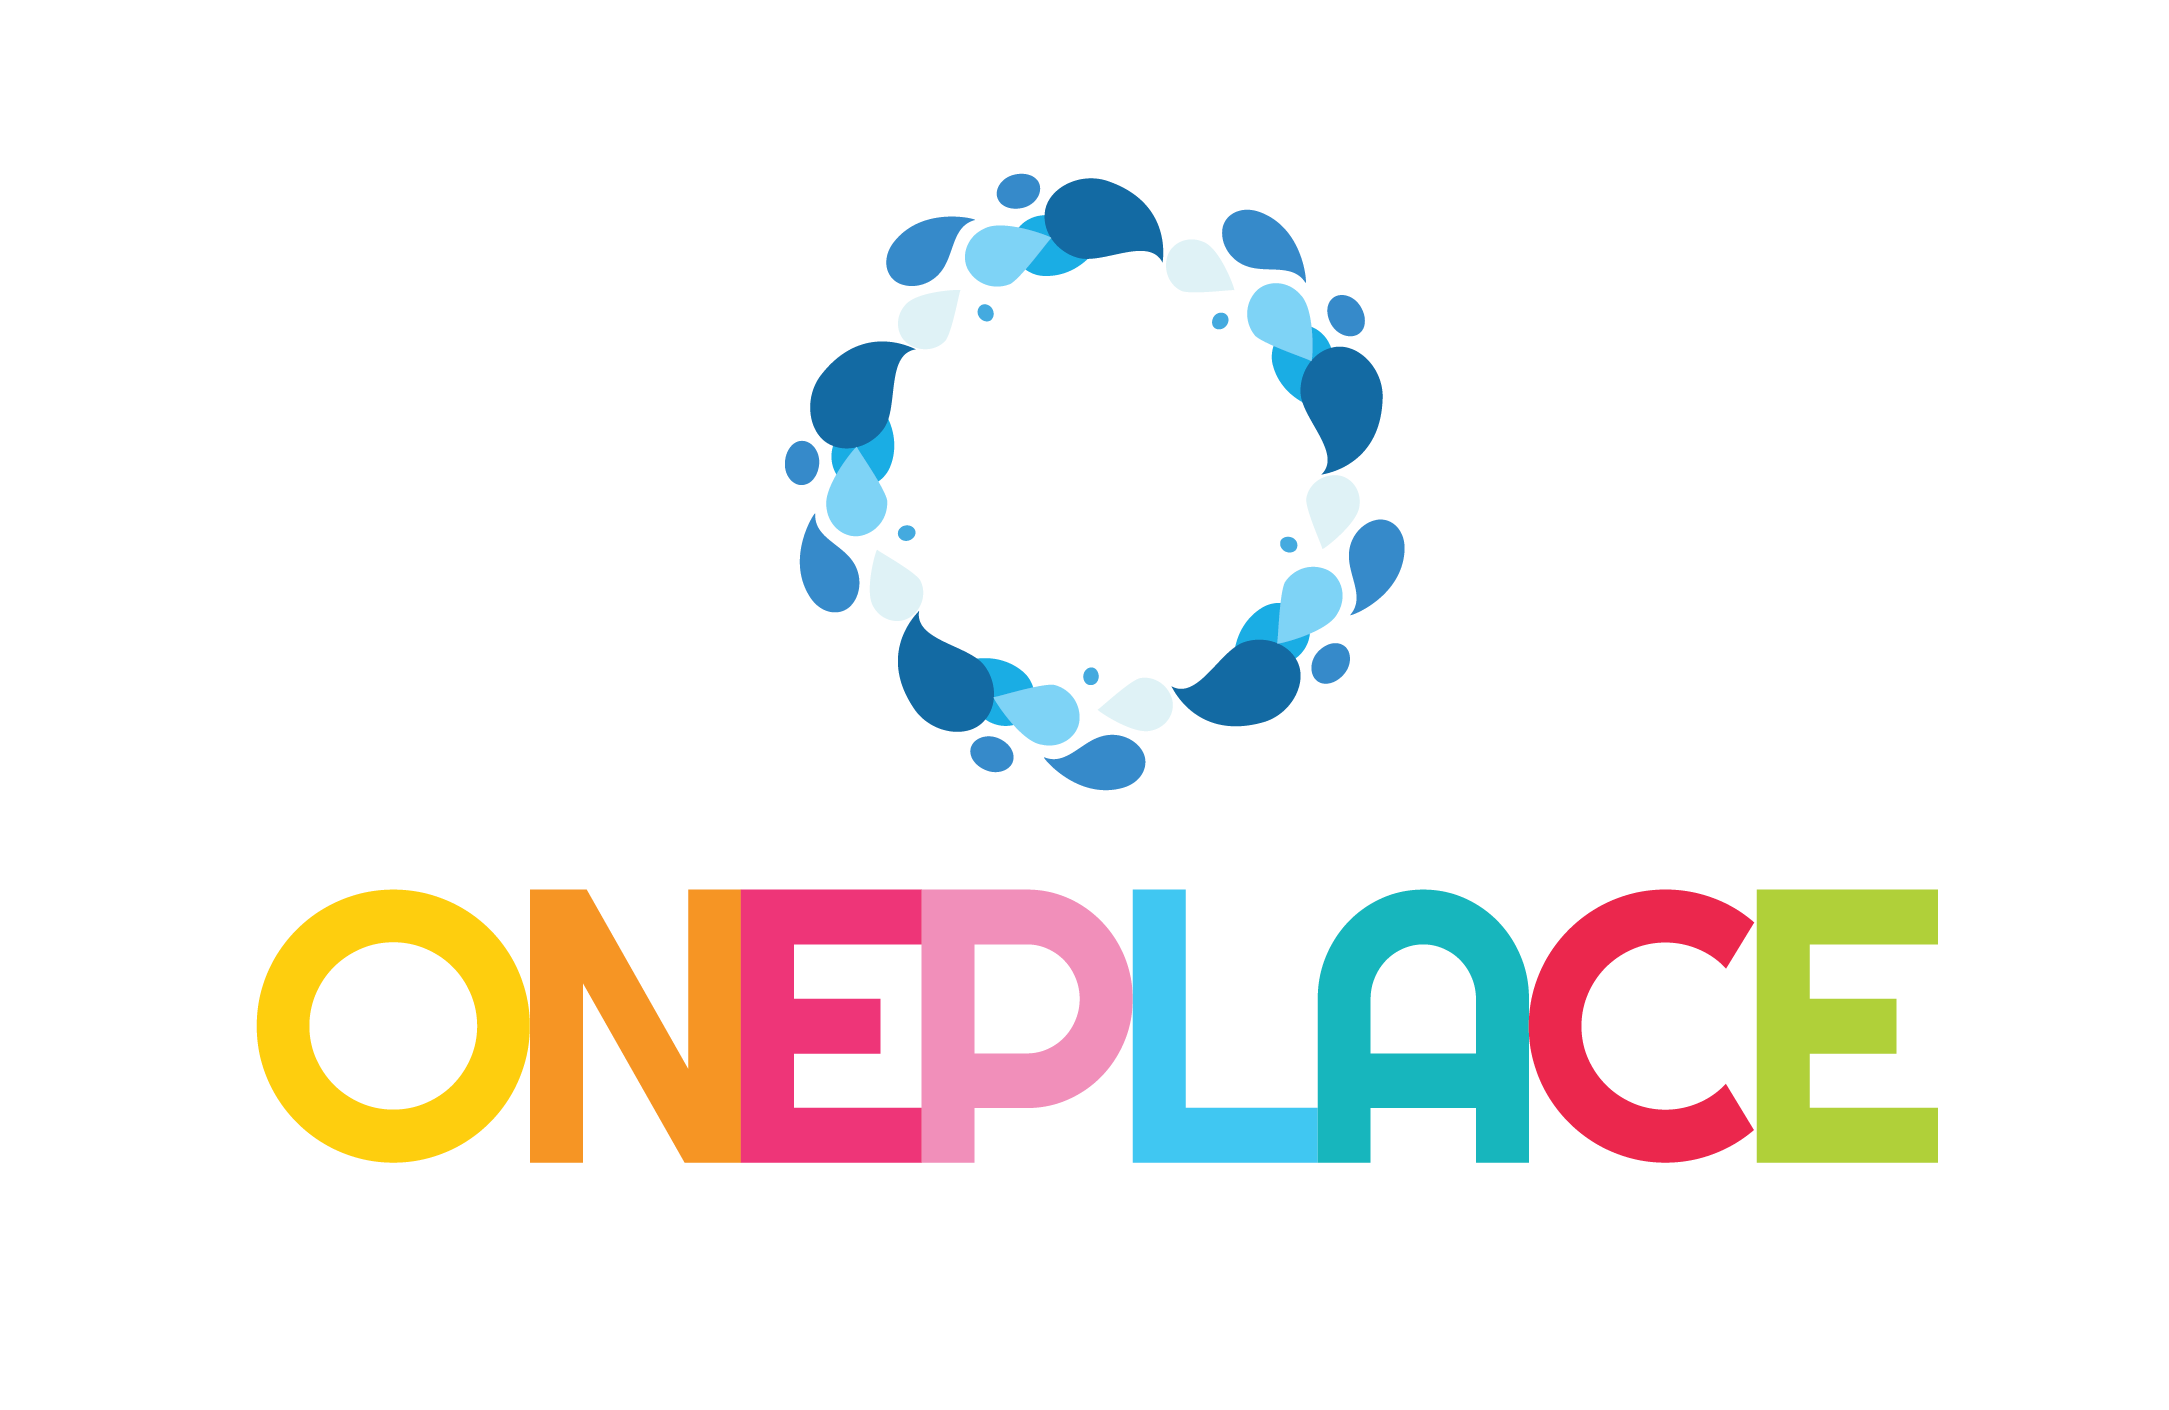 Oneplace